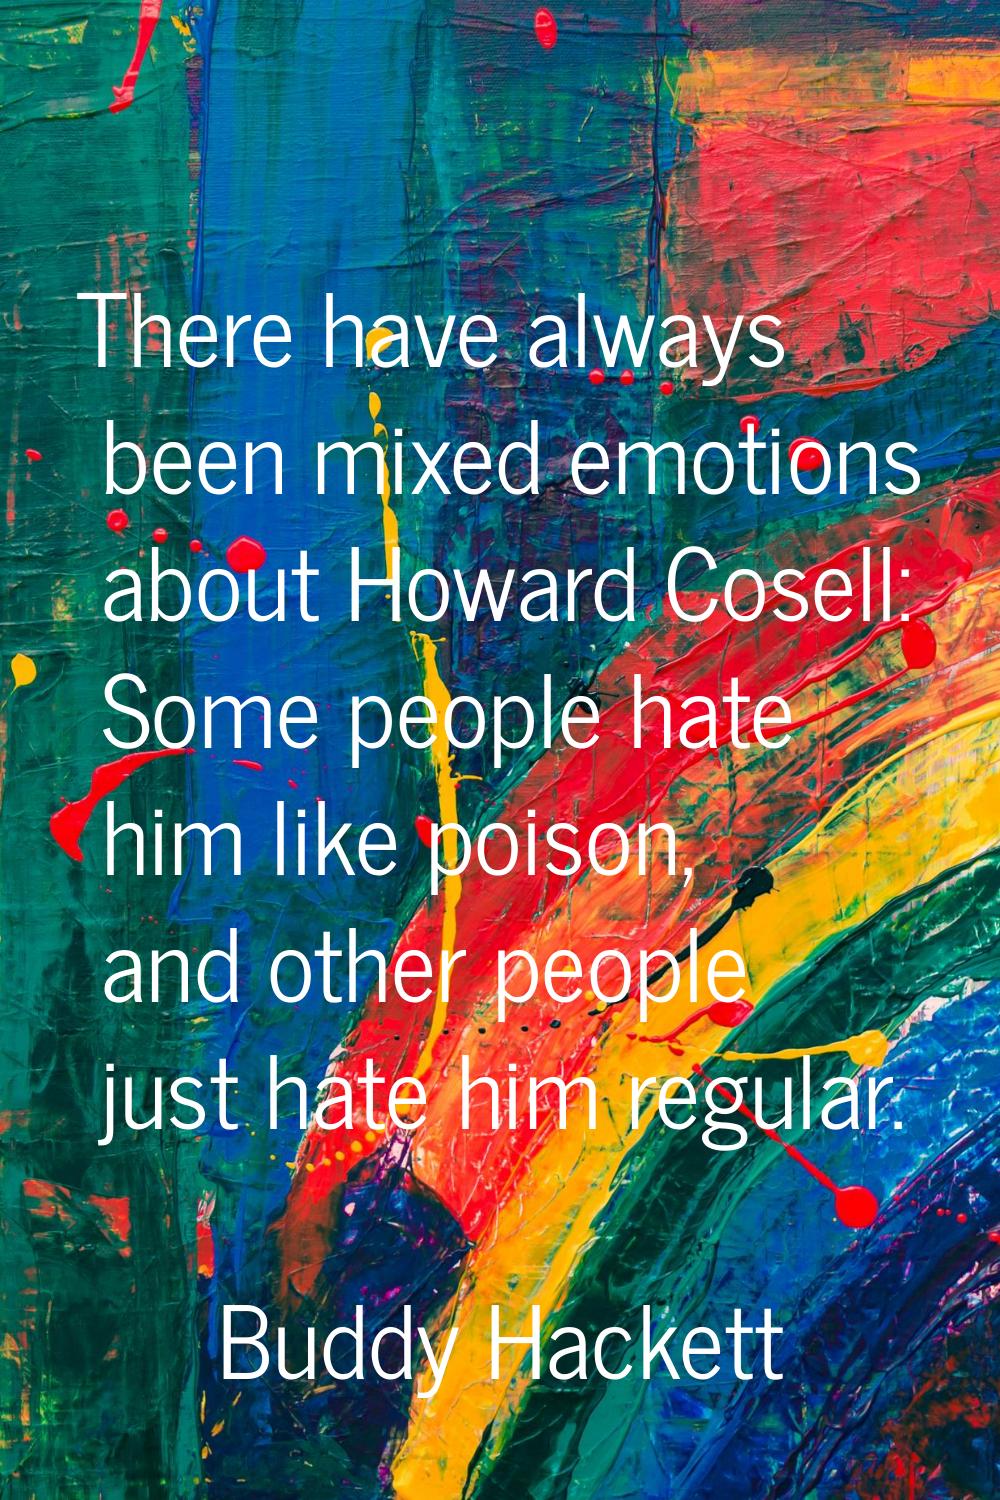 There have always been mixed emotions about Howard Cosell: Some people hate him like poison, and ot